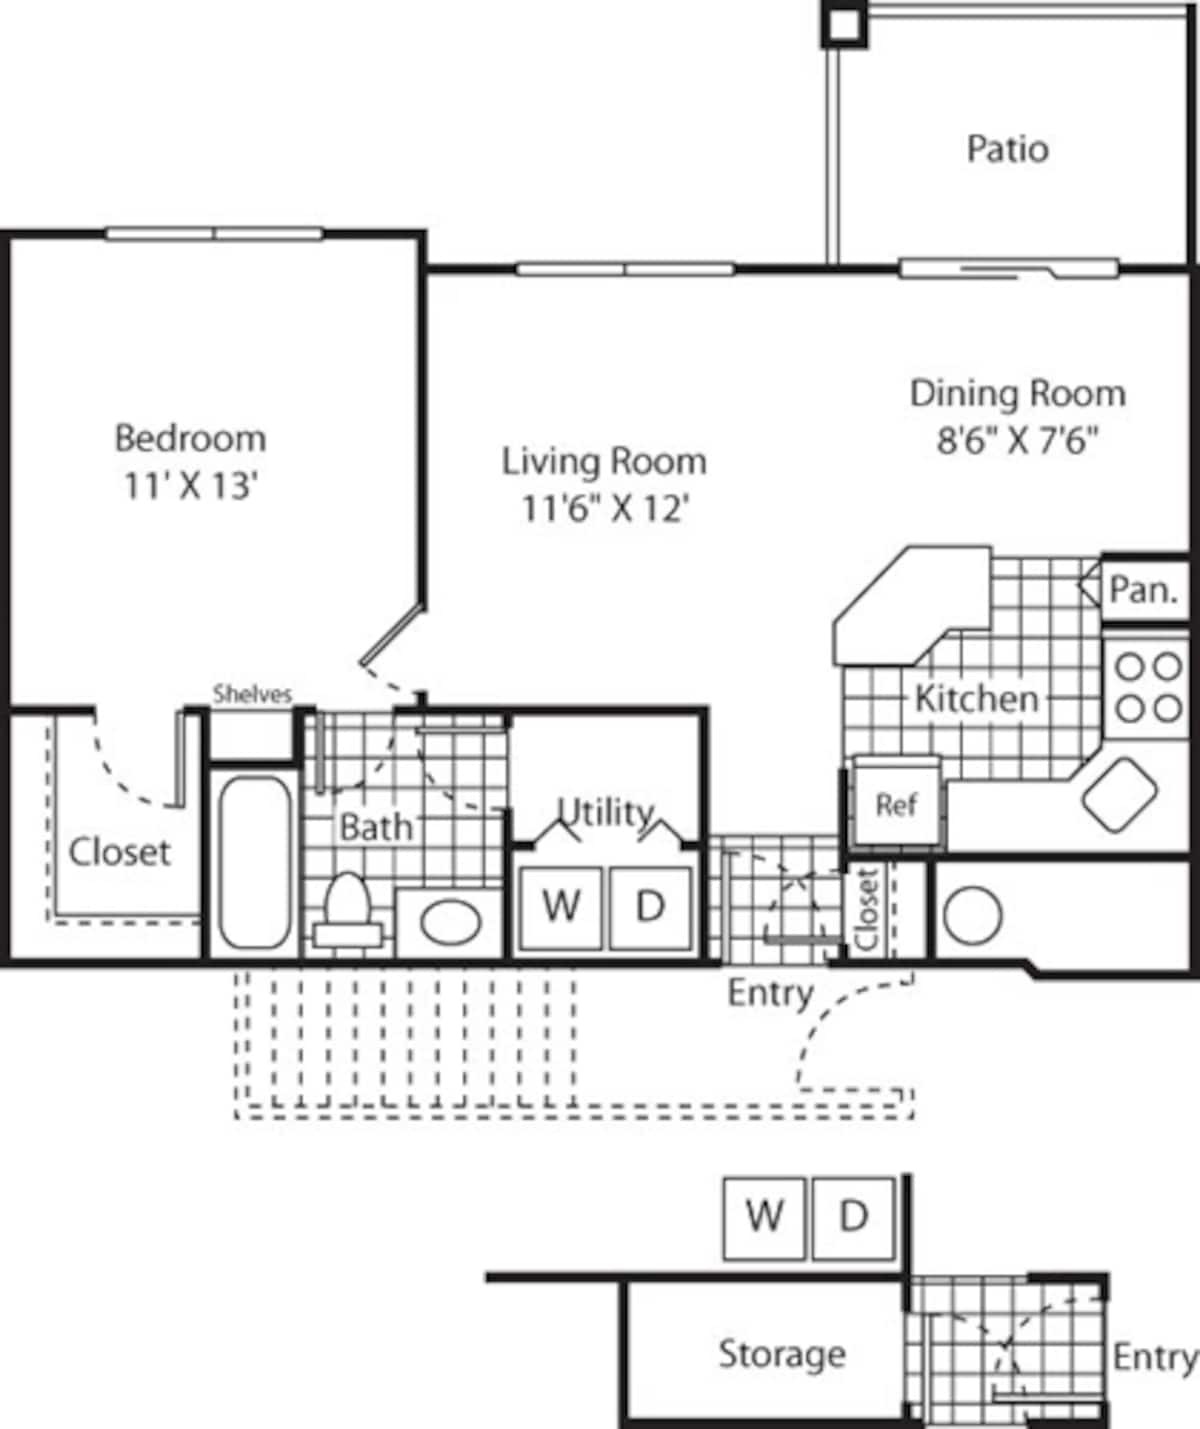 Floorplan diagram for One Bed A-1 - Phase I, showing 1 bedroom